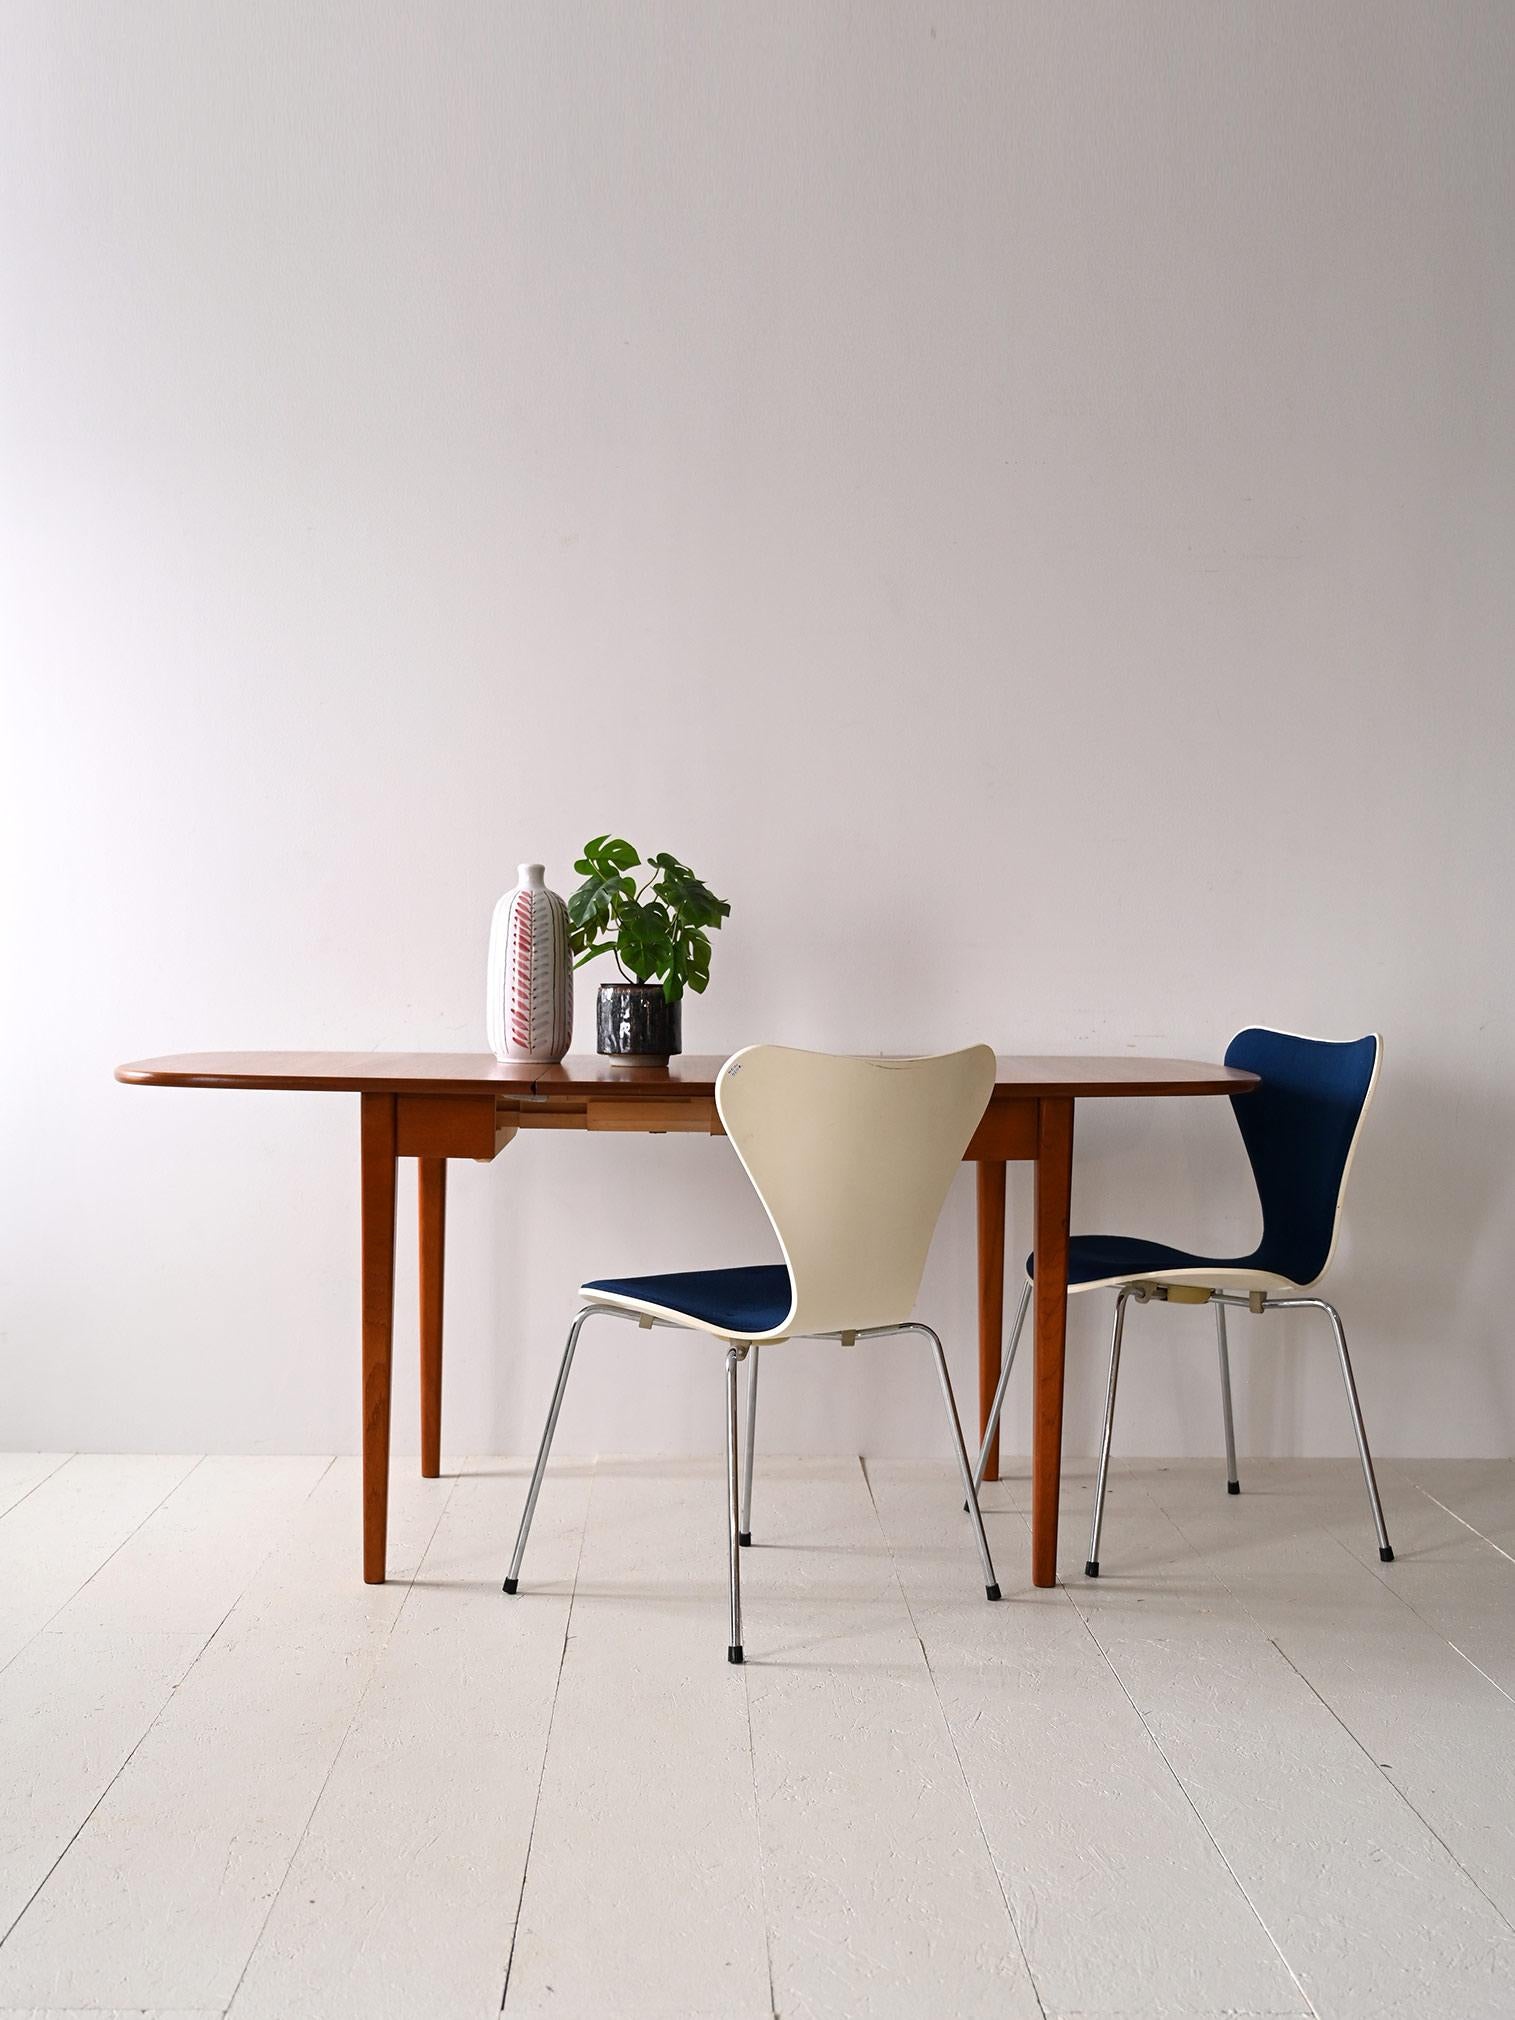 Folding table with a top with rounded corners.

This piece of furniture encapsulates the essence of Scandinavian design that combines aesthetics and functionality. Thanks to its ability to be opened when needed, it is also perfect for small